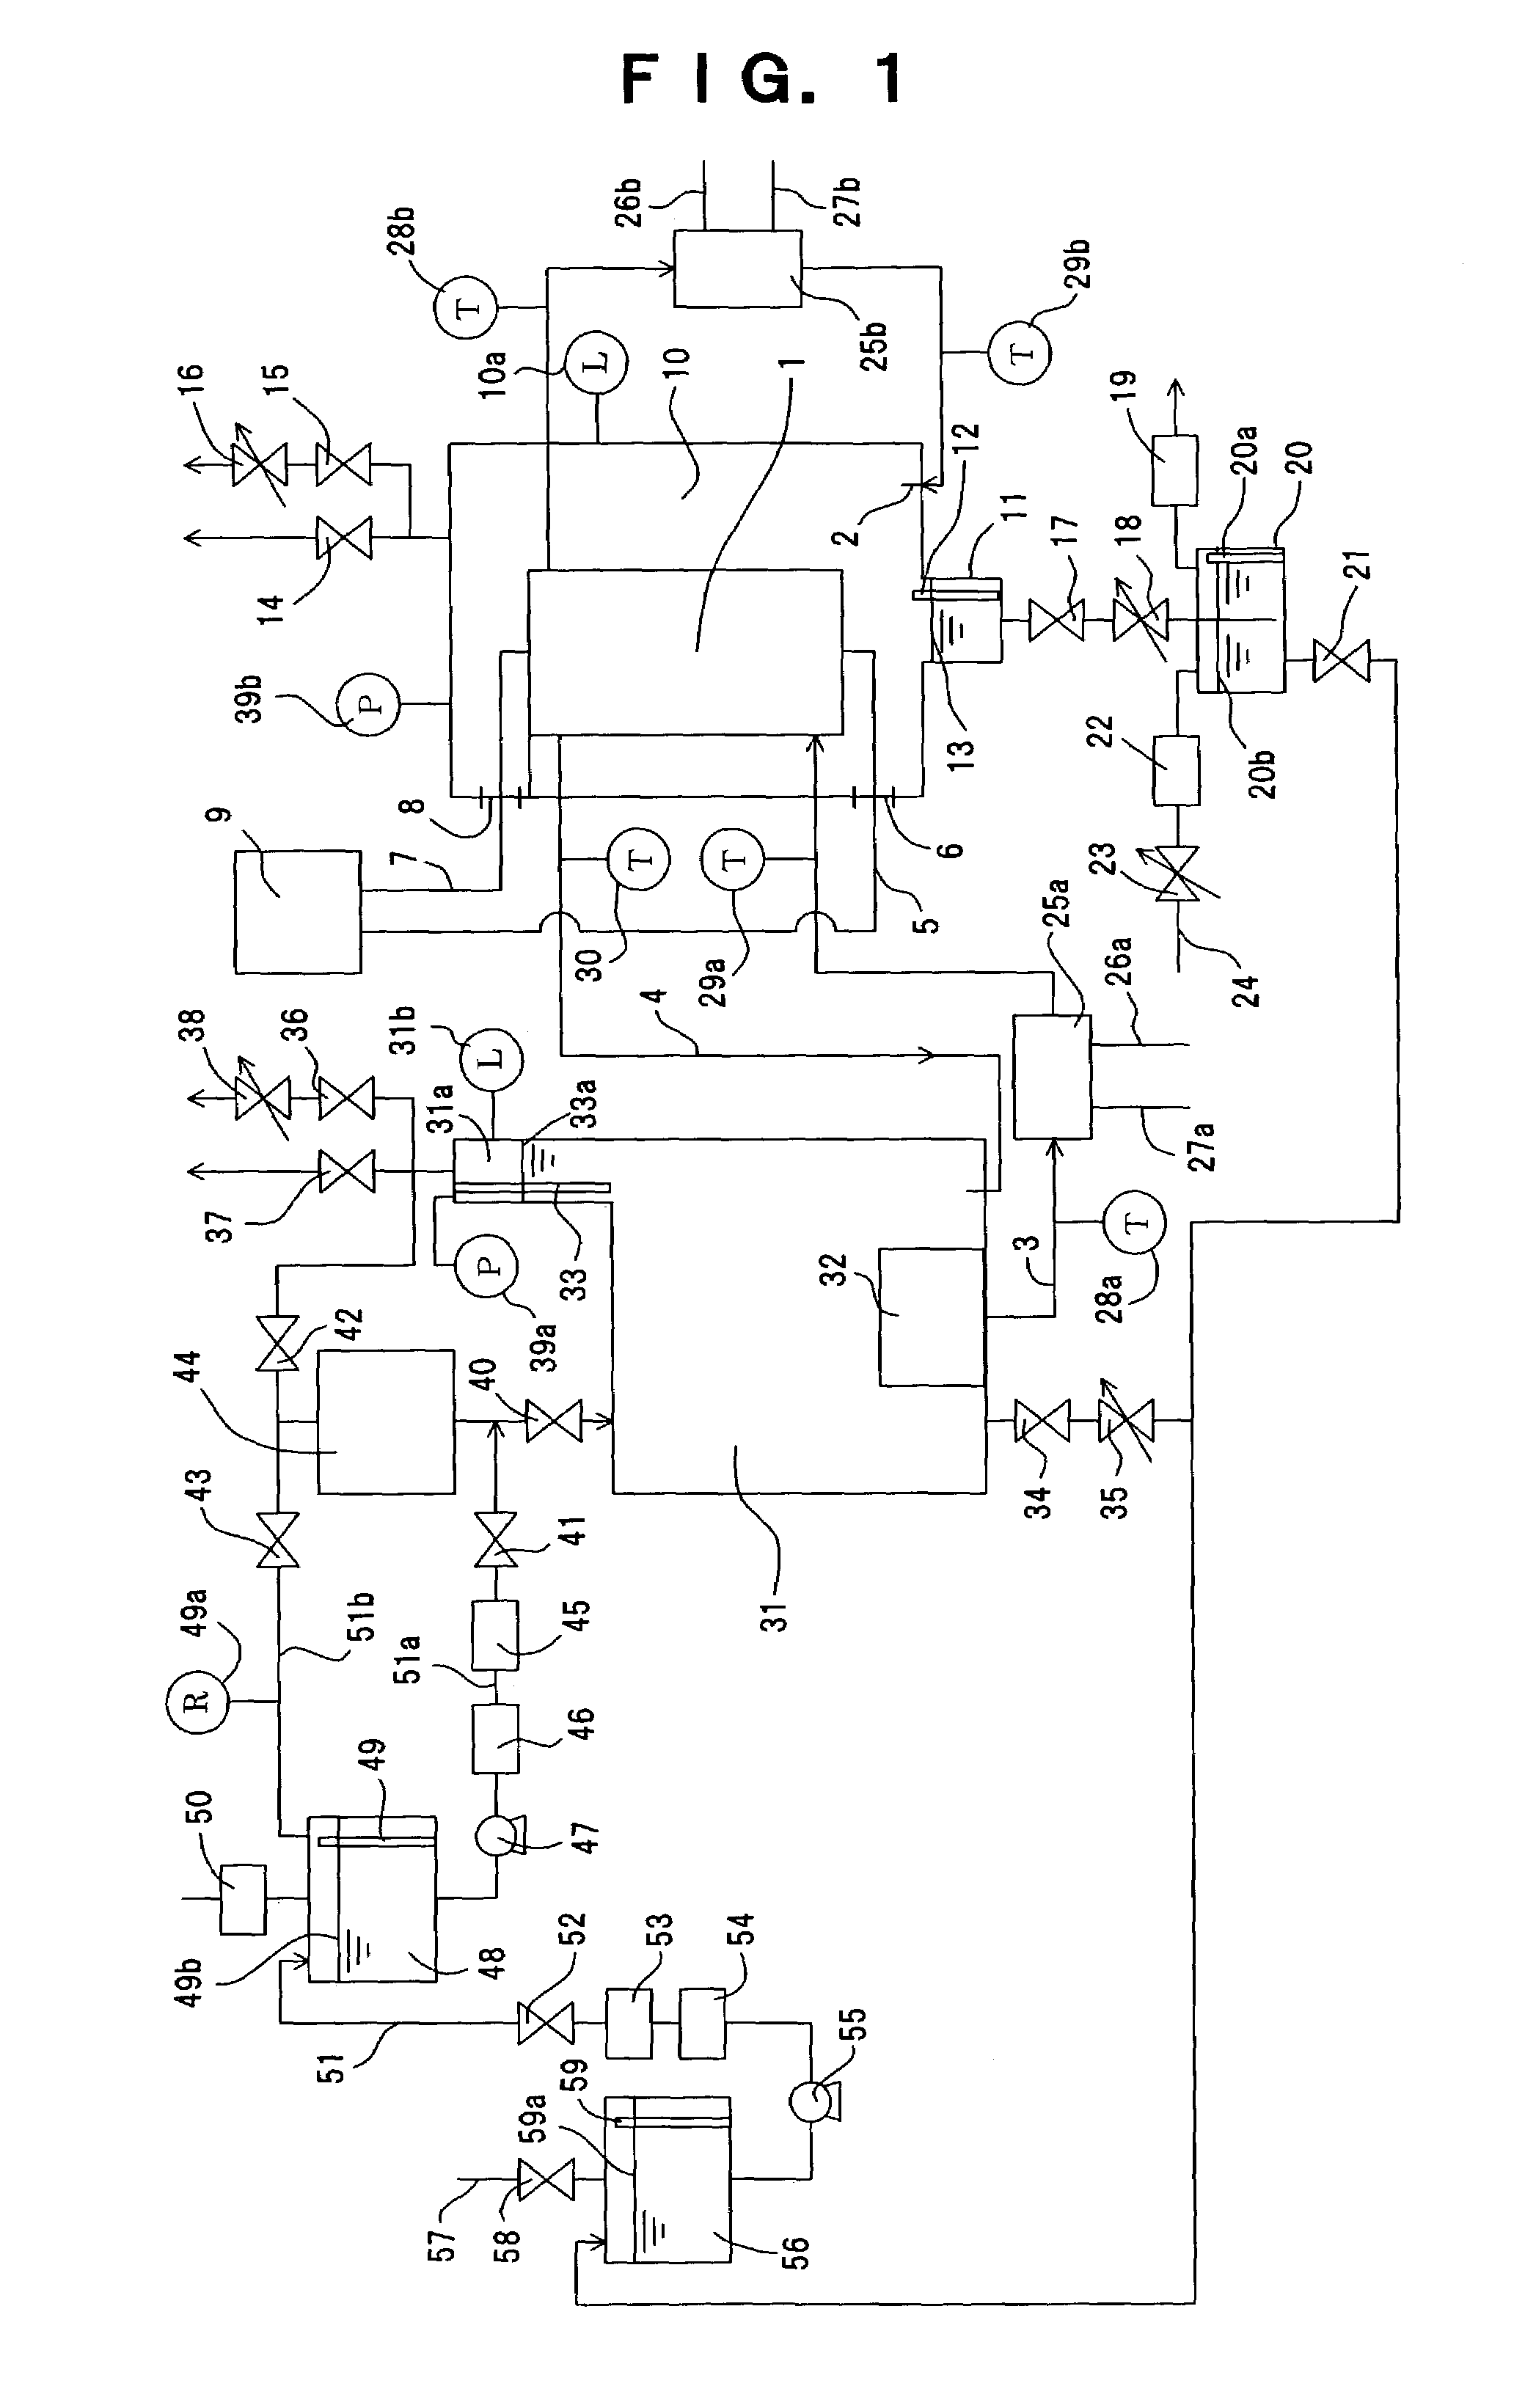 System and method for generating high pressure hydrogen